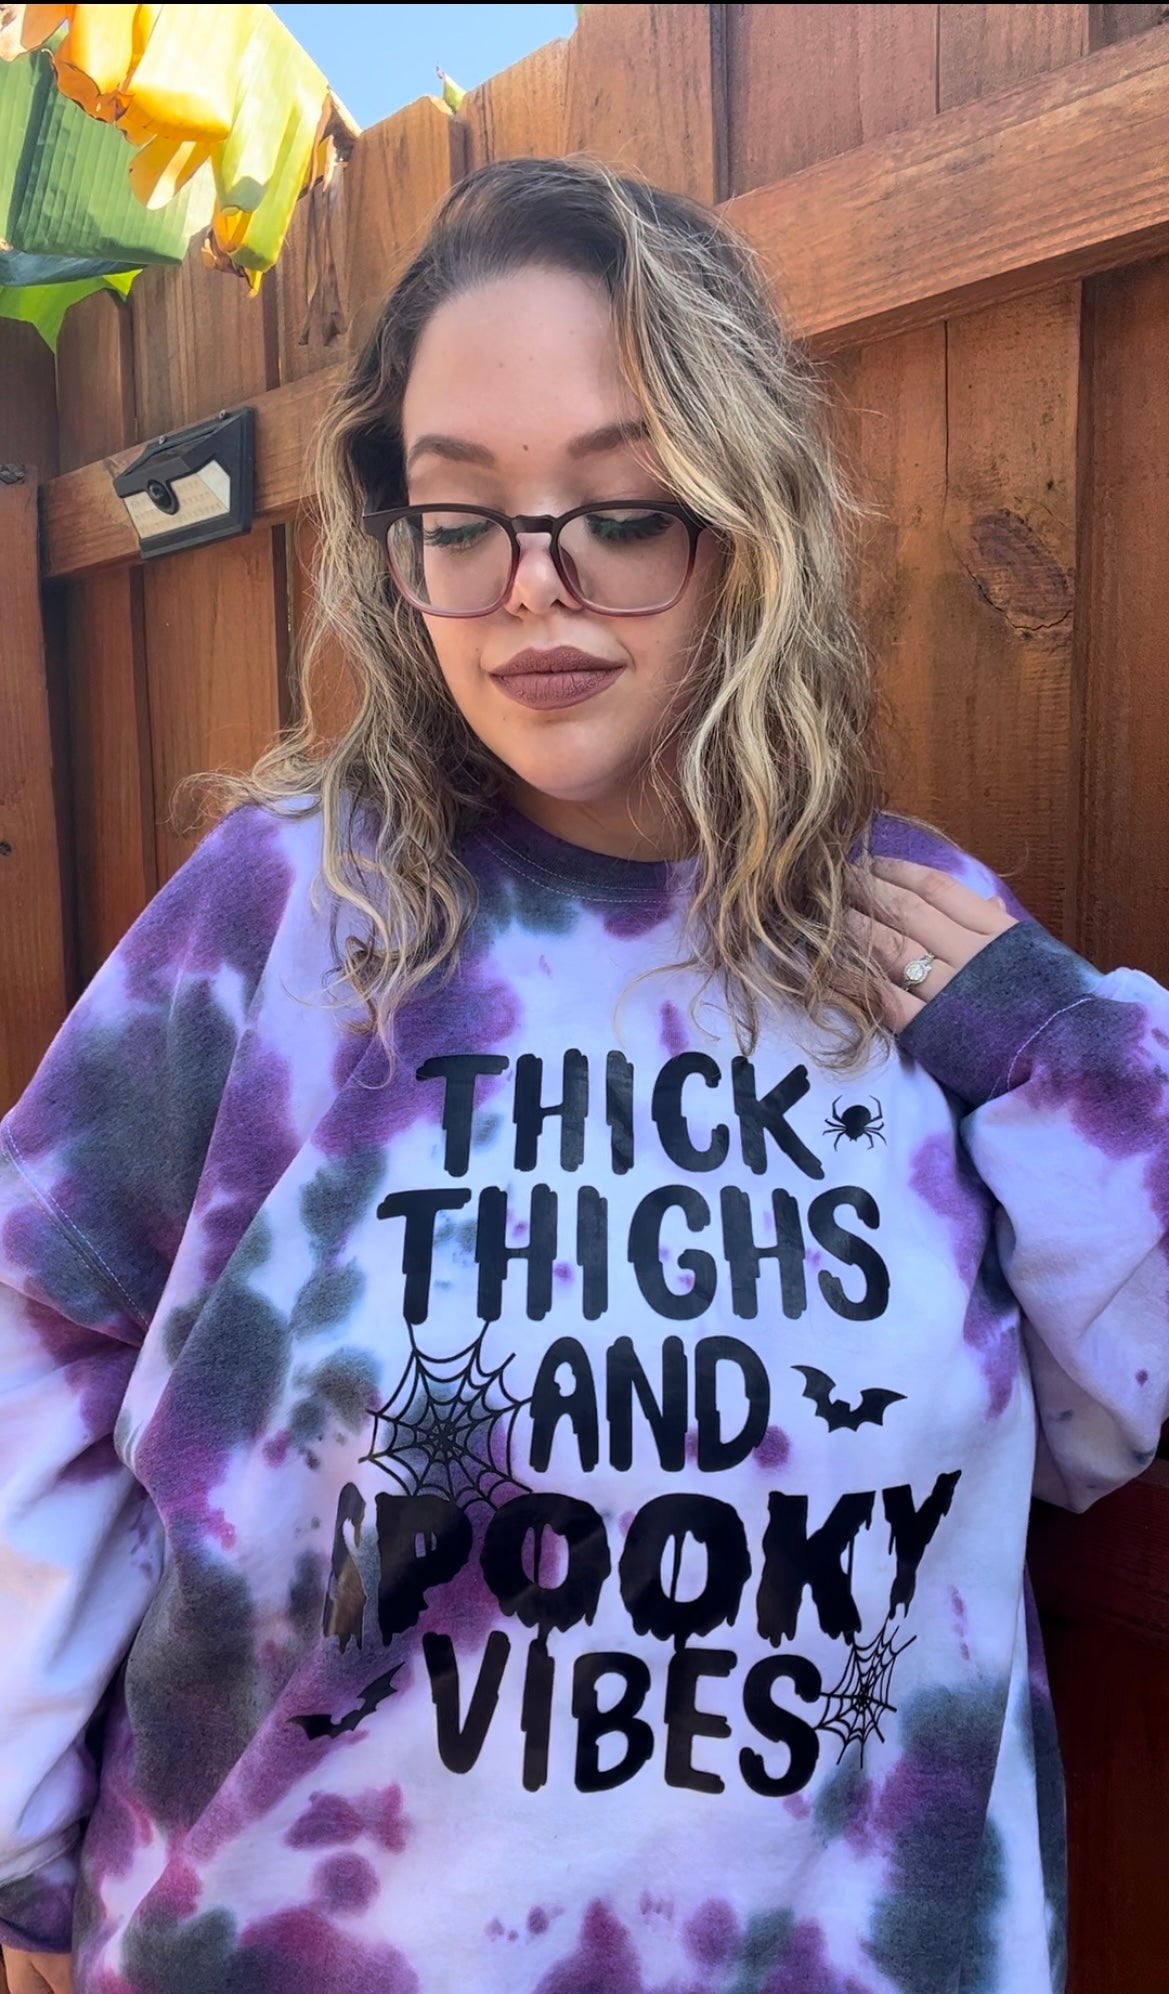 “Thick Thighs and Spooky Vibes” Crewneck Tie Dye